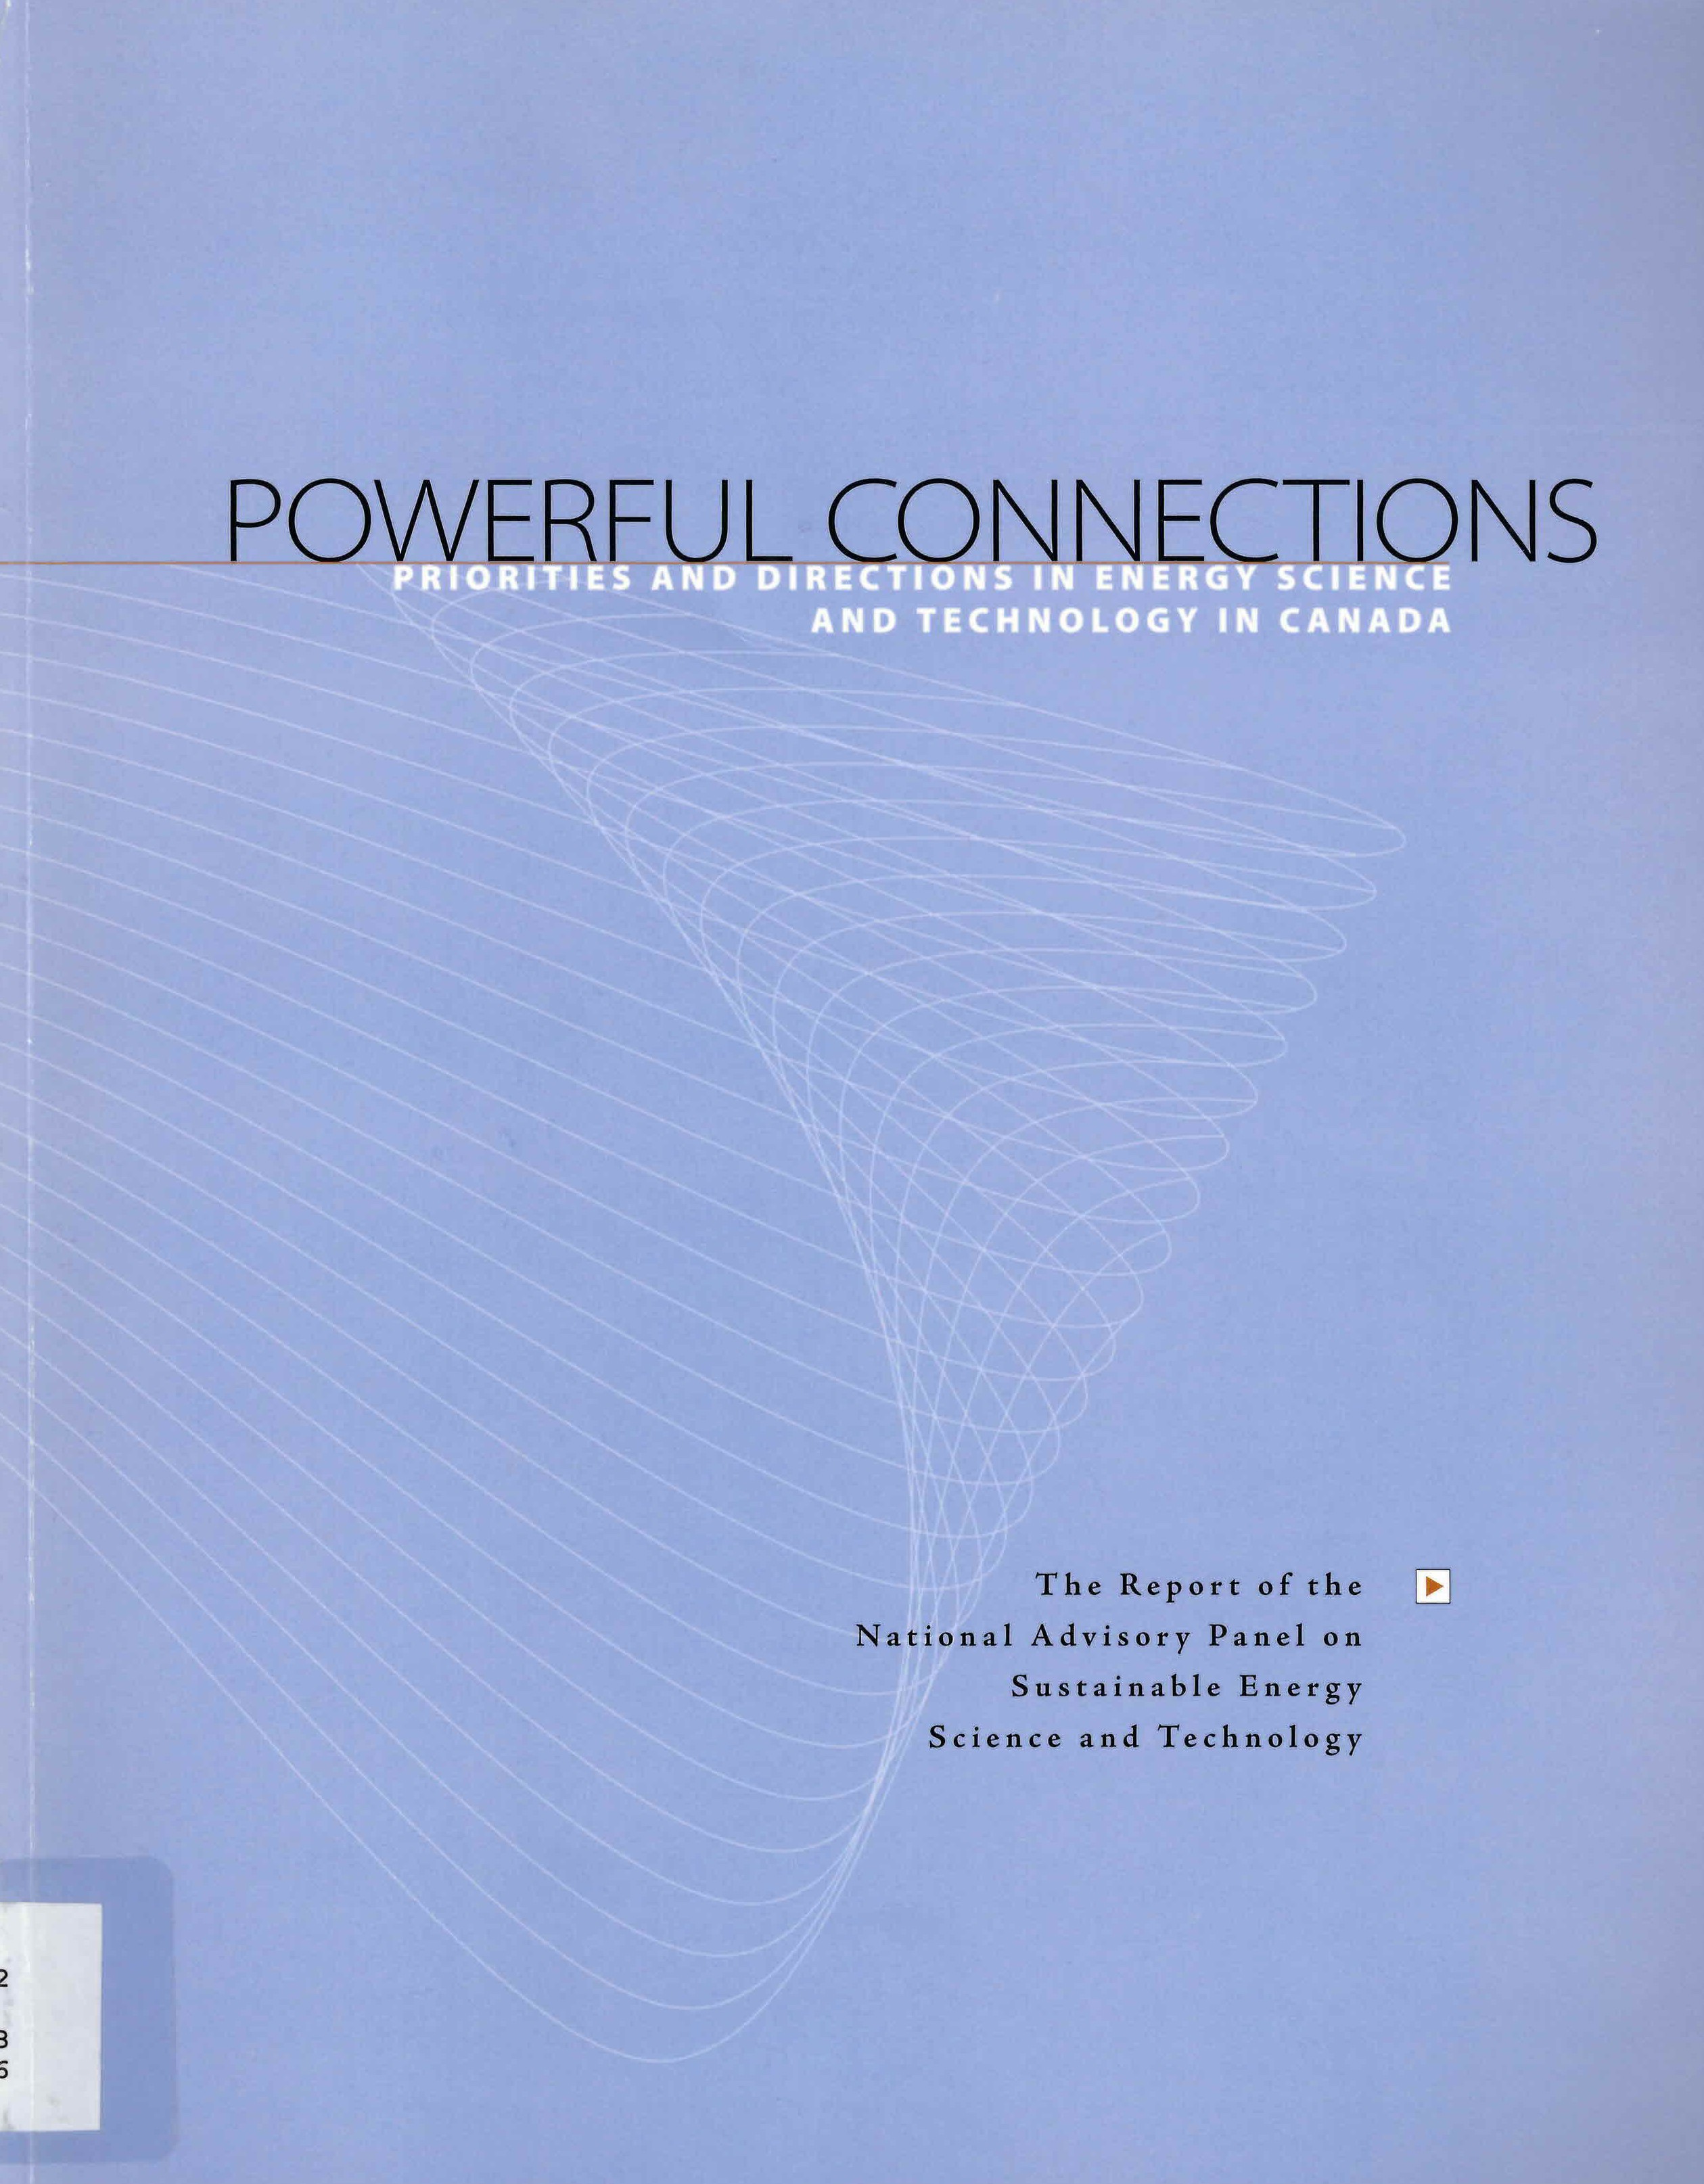 Powerful connections : priorities and directions in energy science and technology in Canada : the report of the National Advisory Panel on Sustainable Energy Science and Technology.